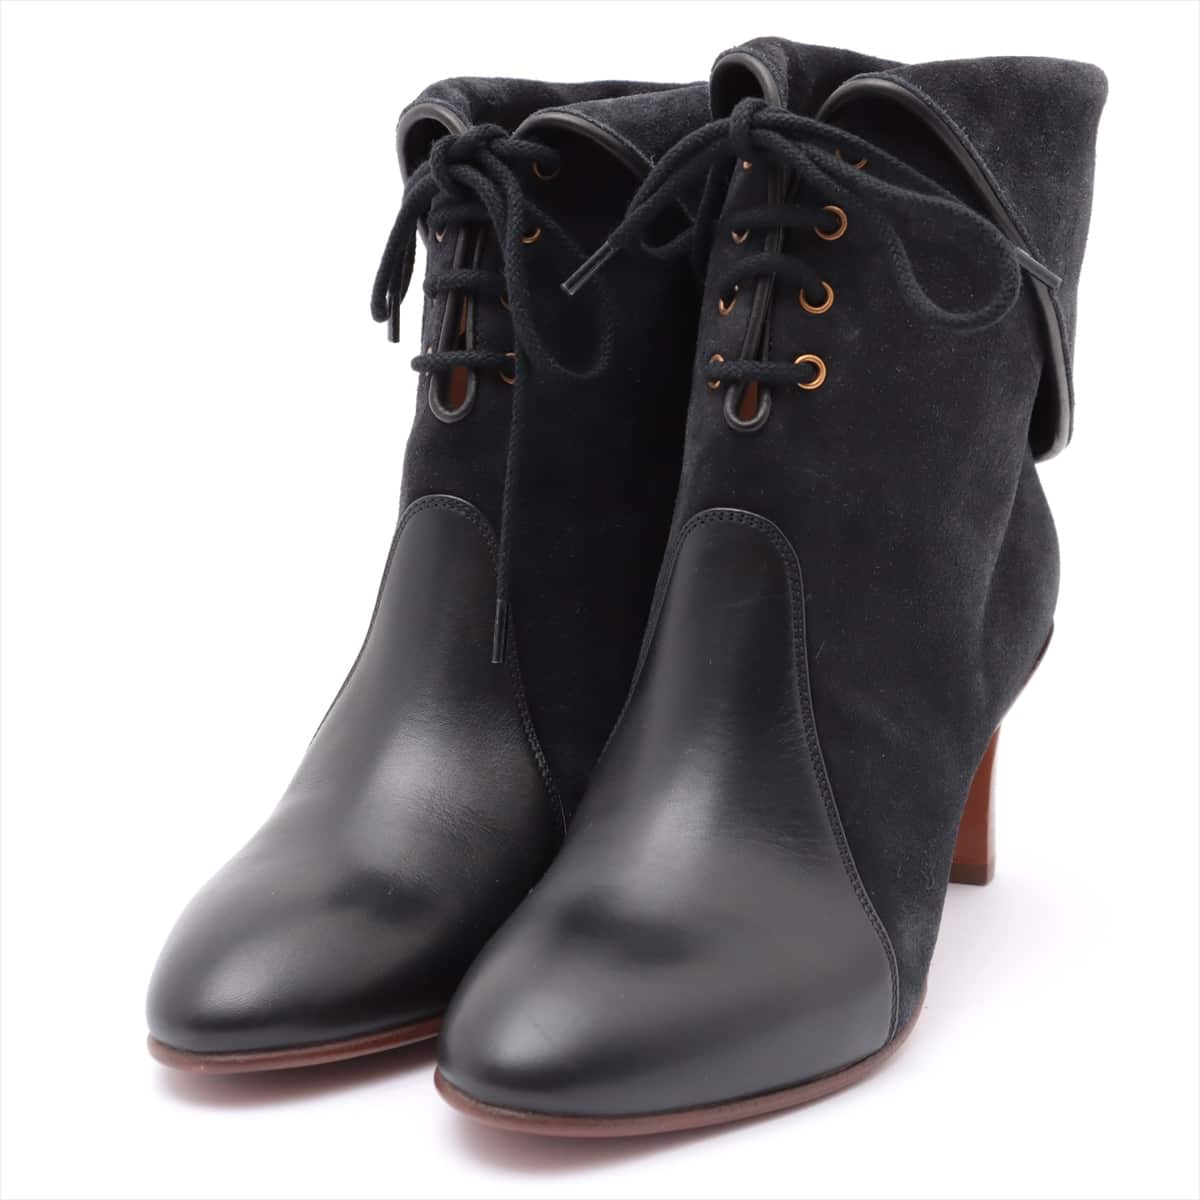 Chloe Leather & Suede Short Boots 36 Ladies' Black x Gray